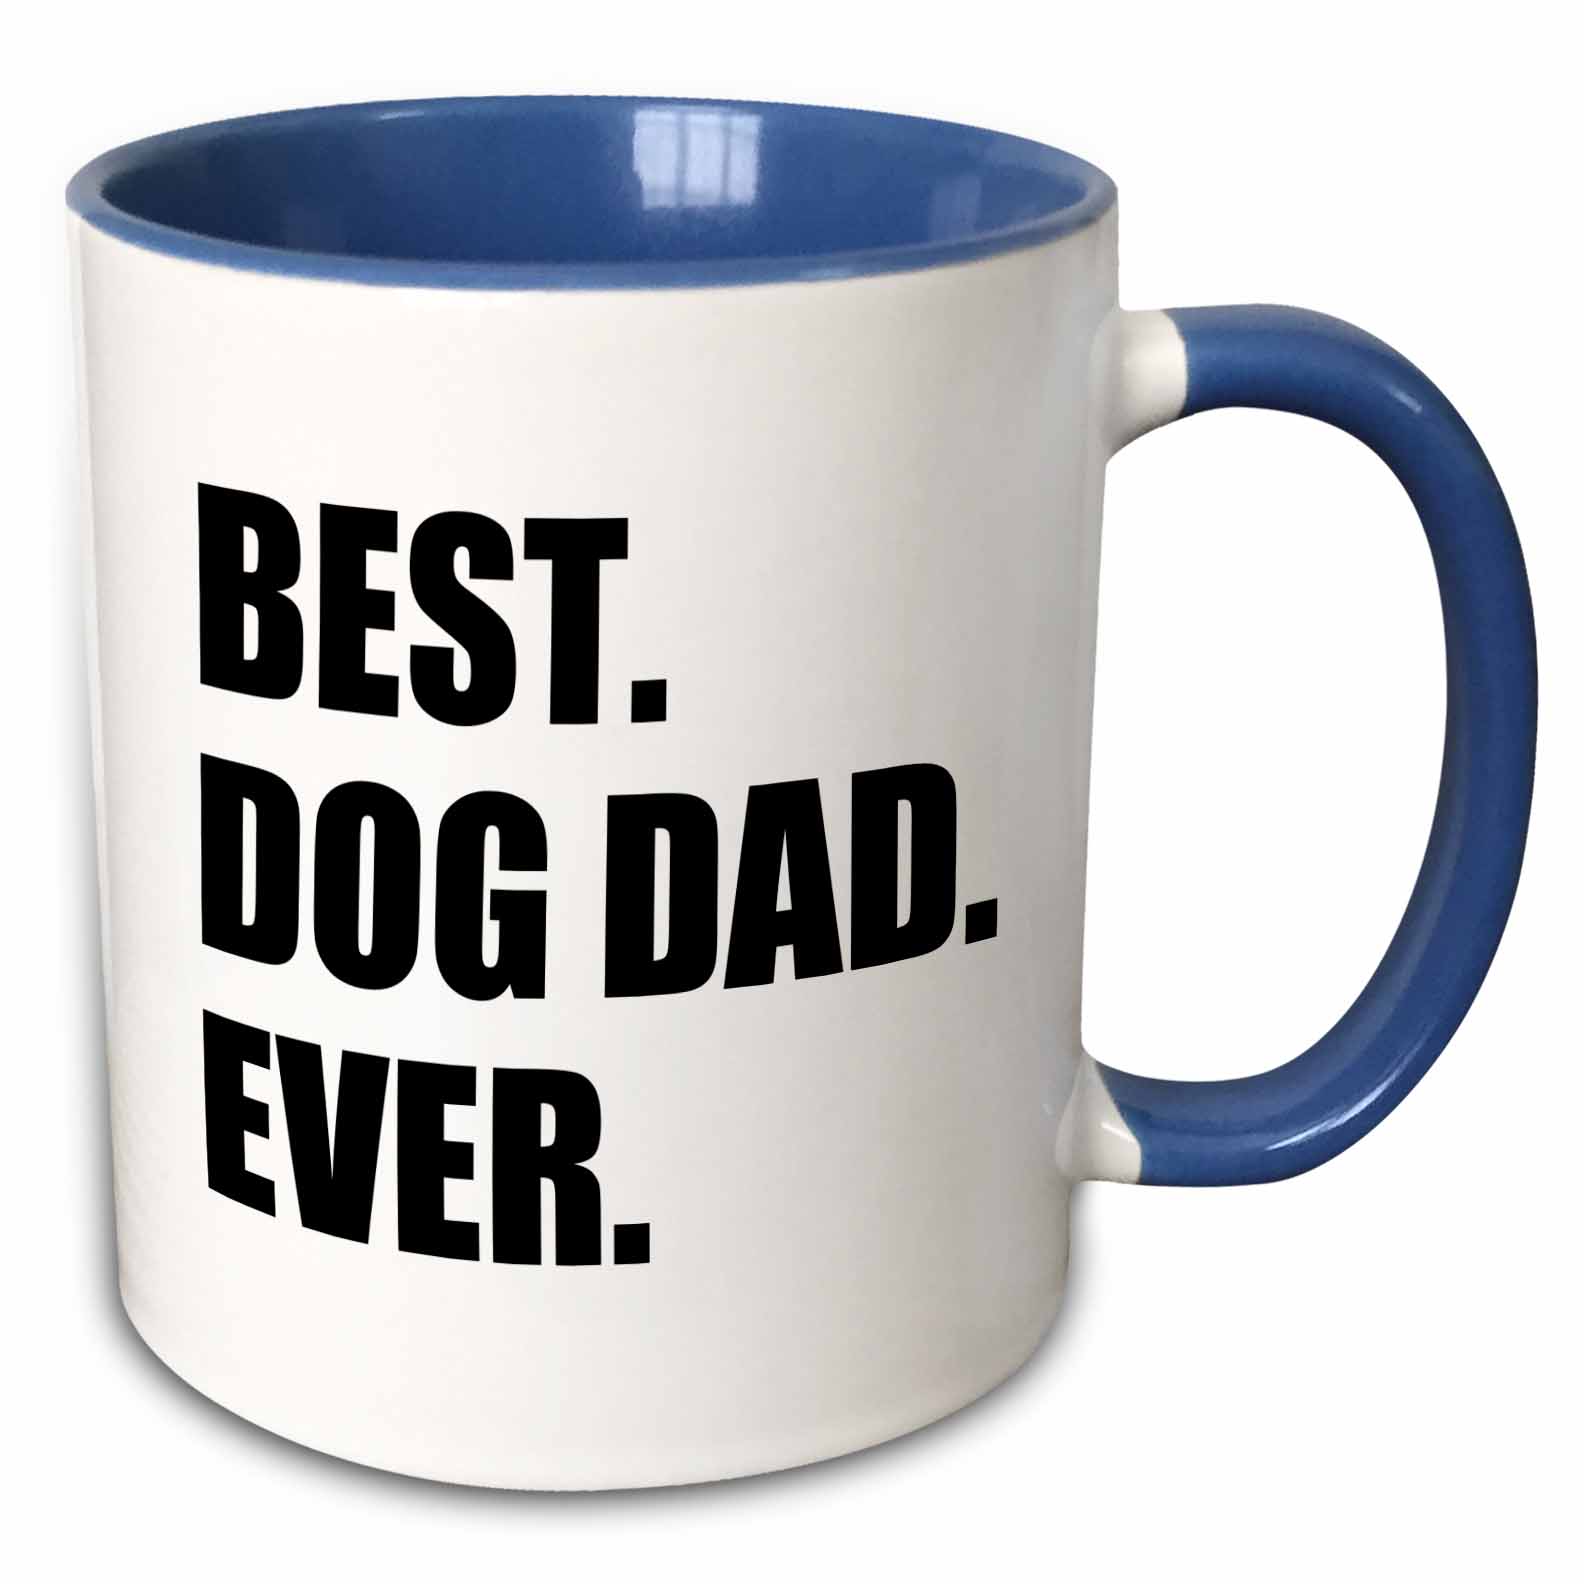 Best Dog Dad Ever - fun pet owner gifts for him - animal lover text 15oz Two-Tone Blue Mug mug-184992-11 - image 1 of 3